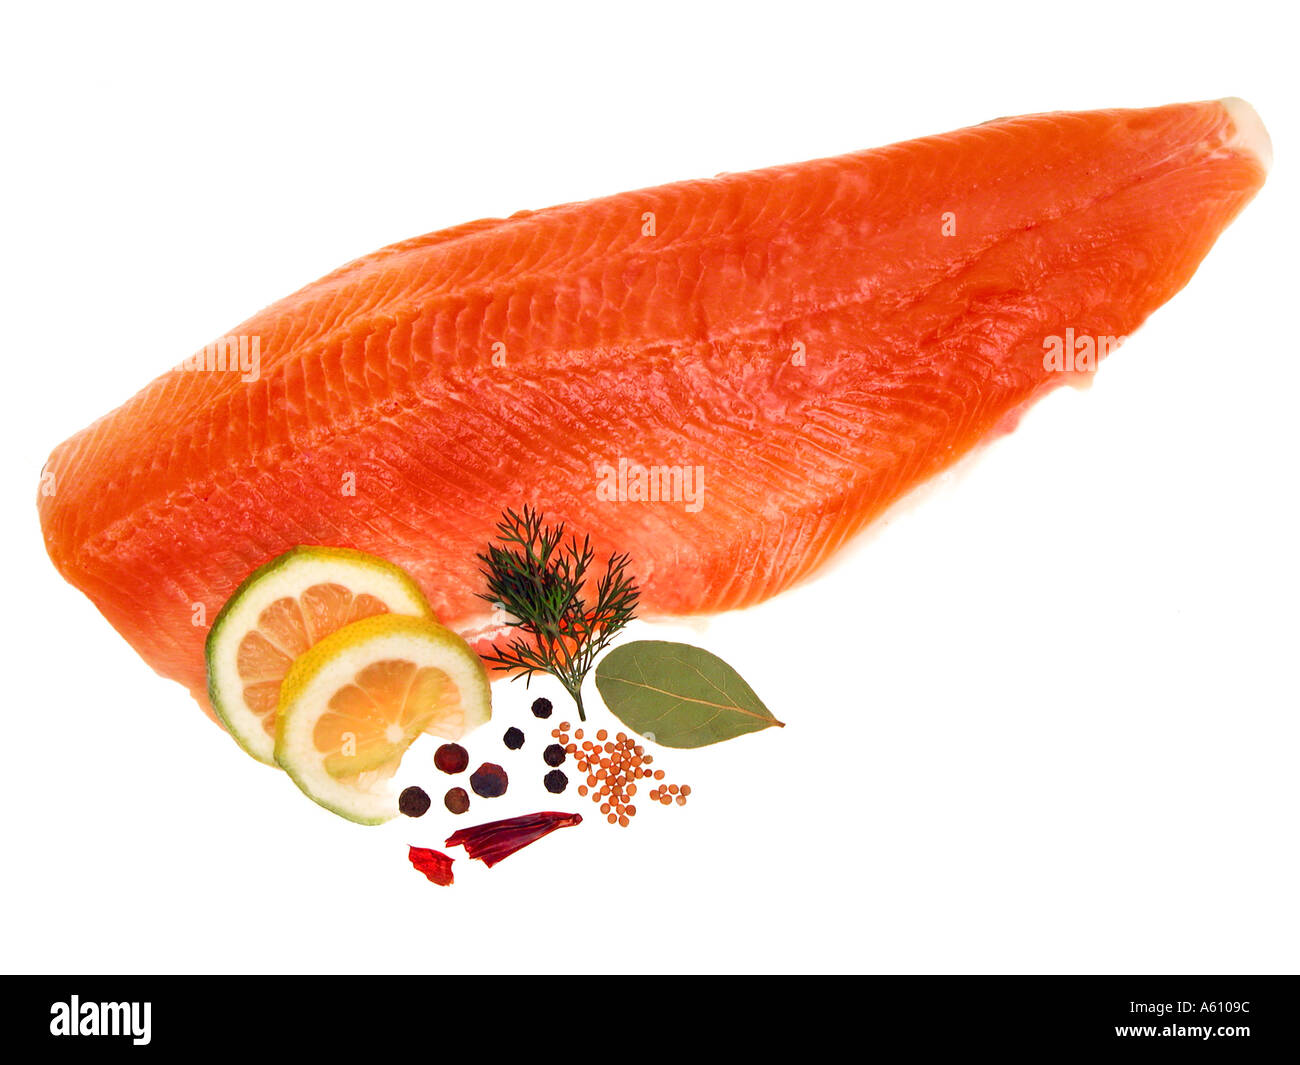 how to fillet a salmon instructions